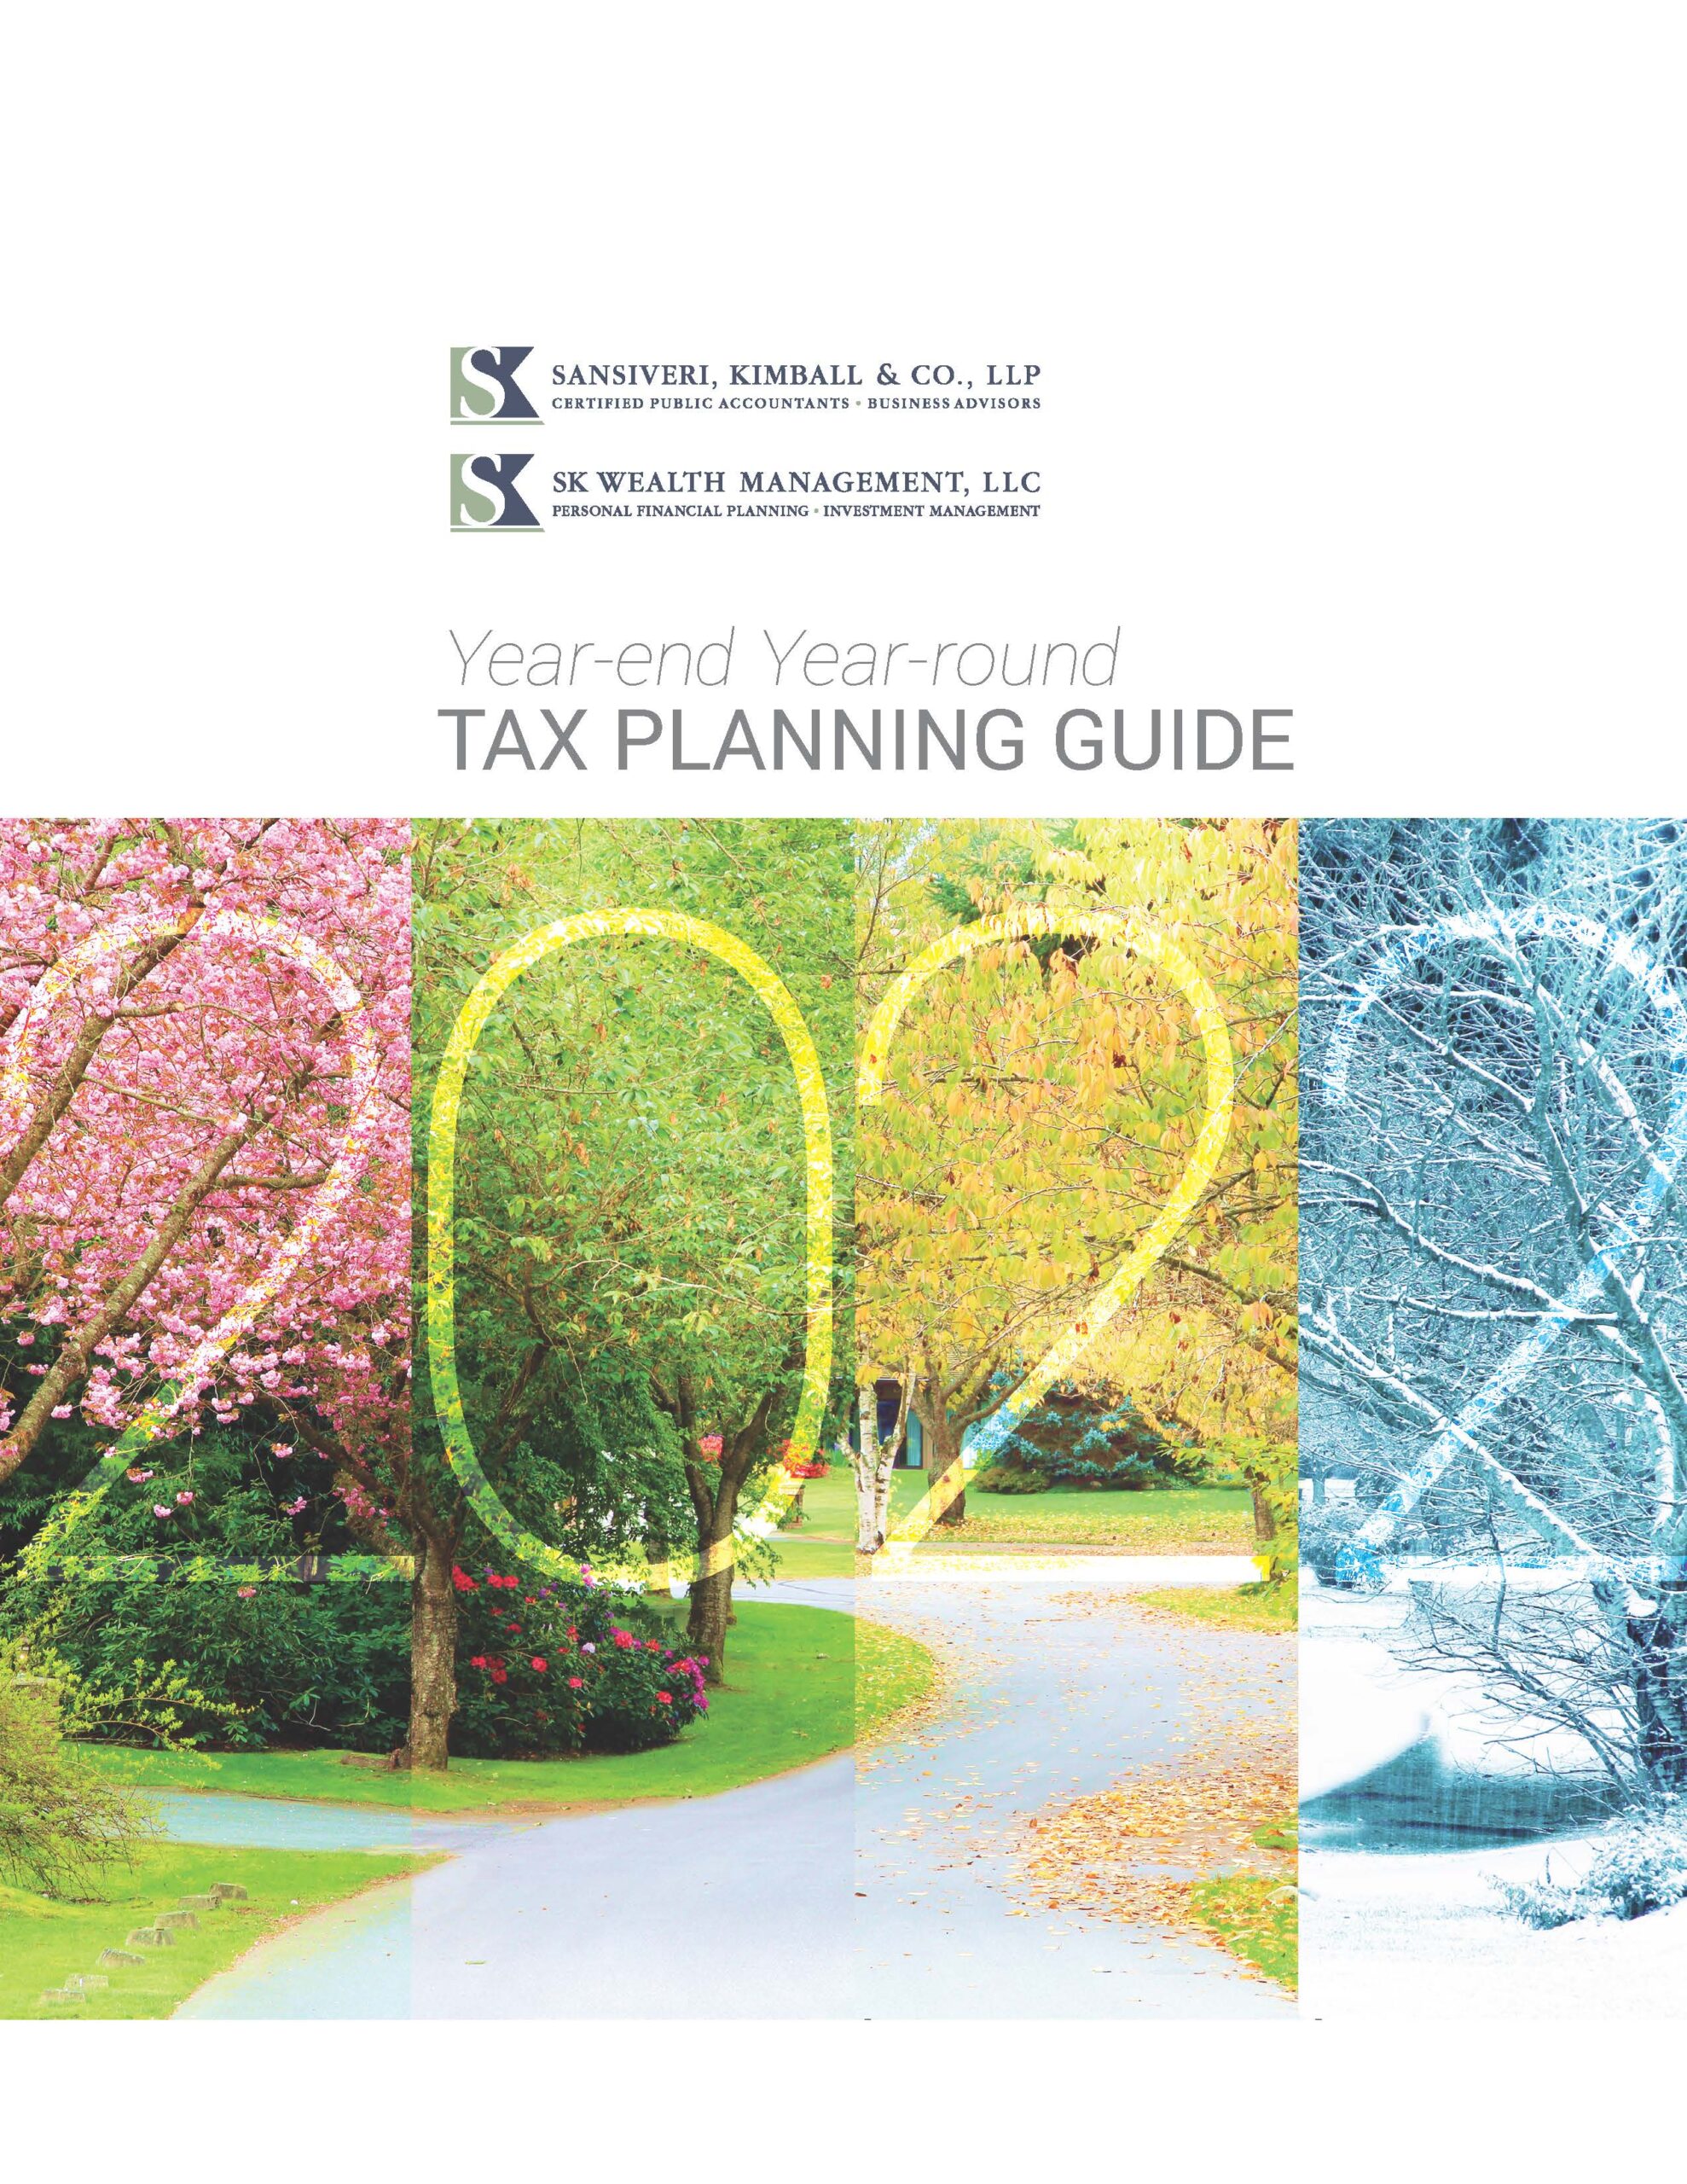 Sansiveri - Tax Planning Guide - Certified Public Accountants - Forensic Accounting - Financial Experts